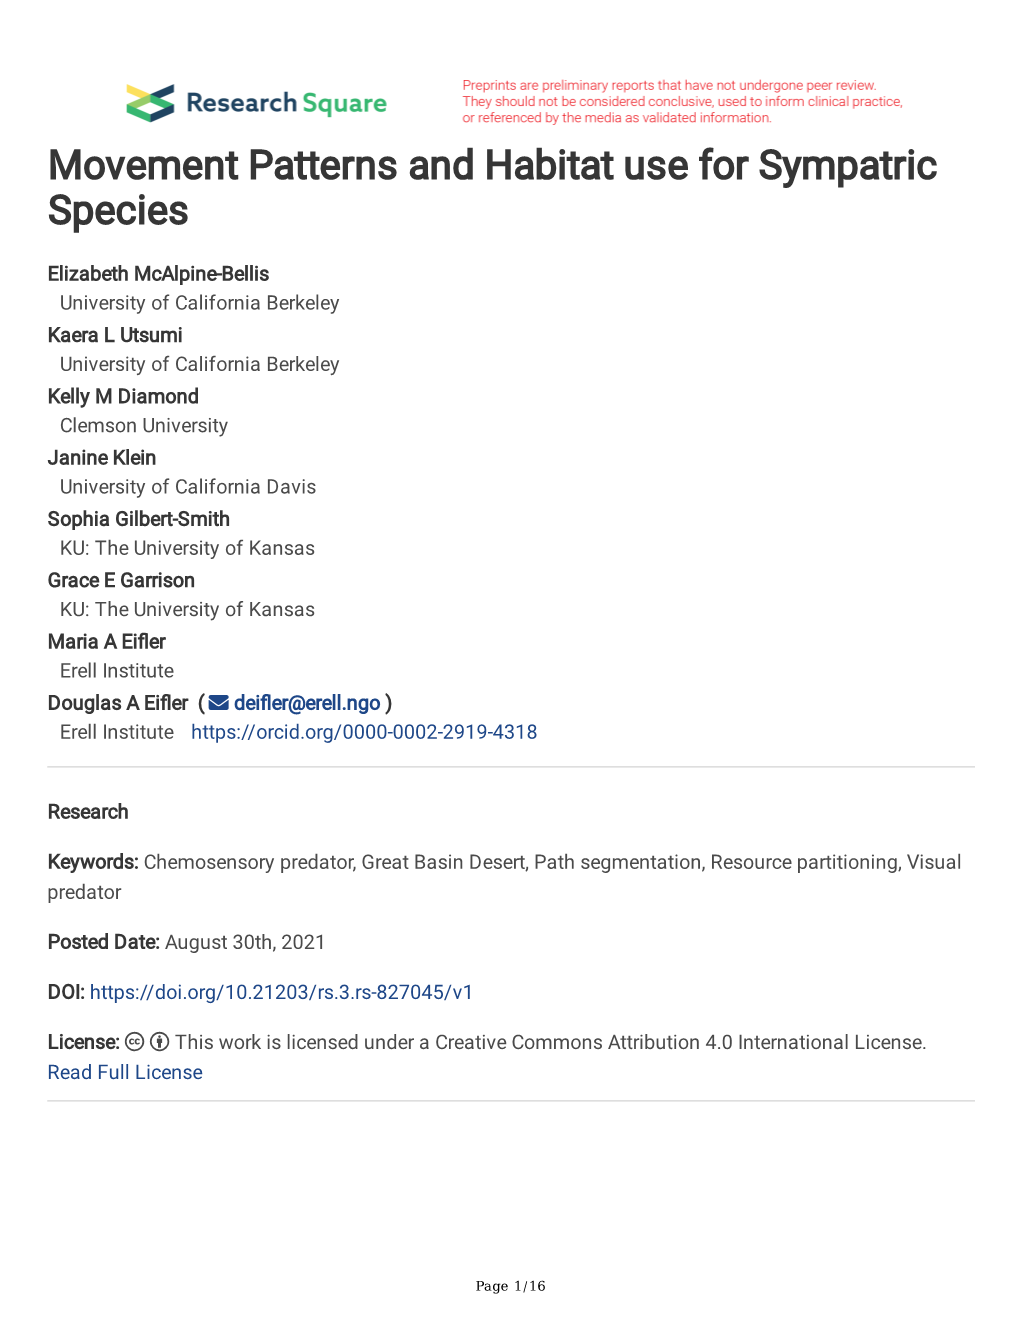 Movement Patterns and Habitat Use for Sympatric Species